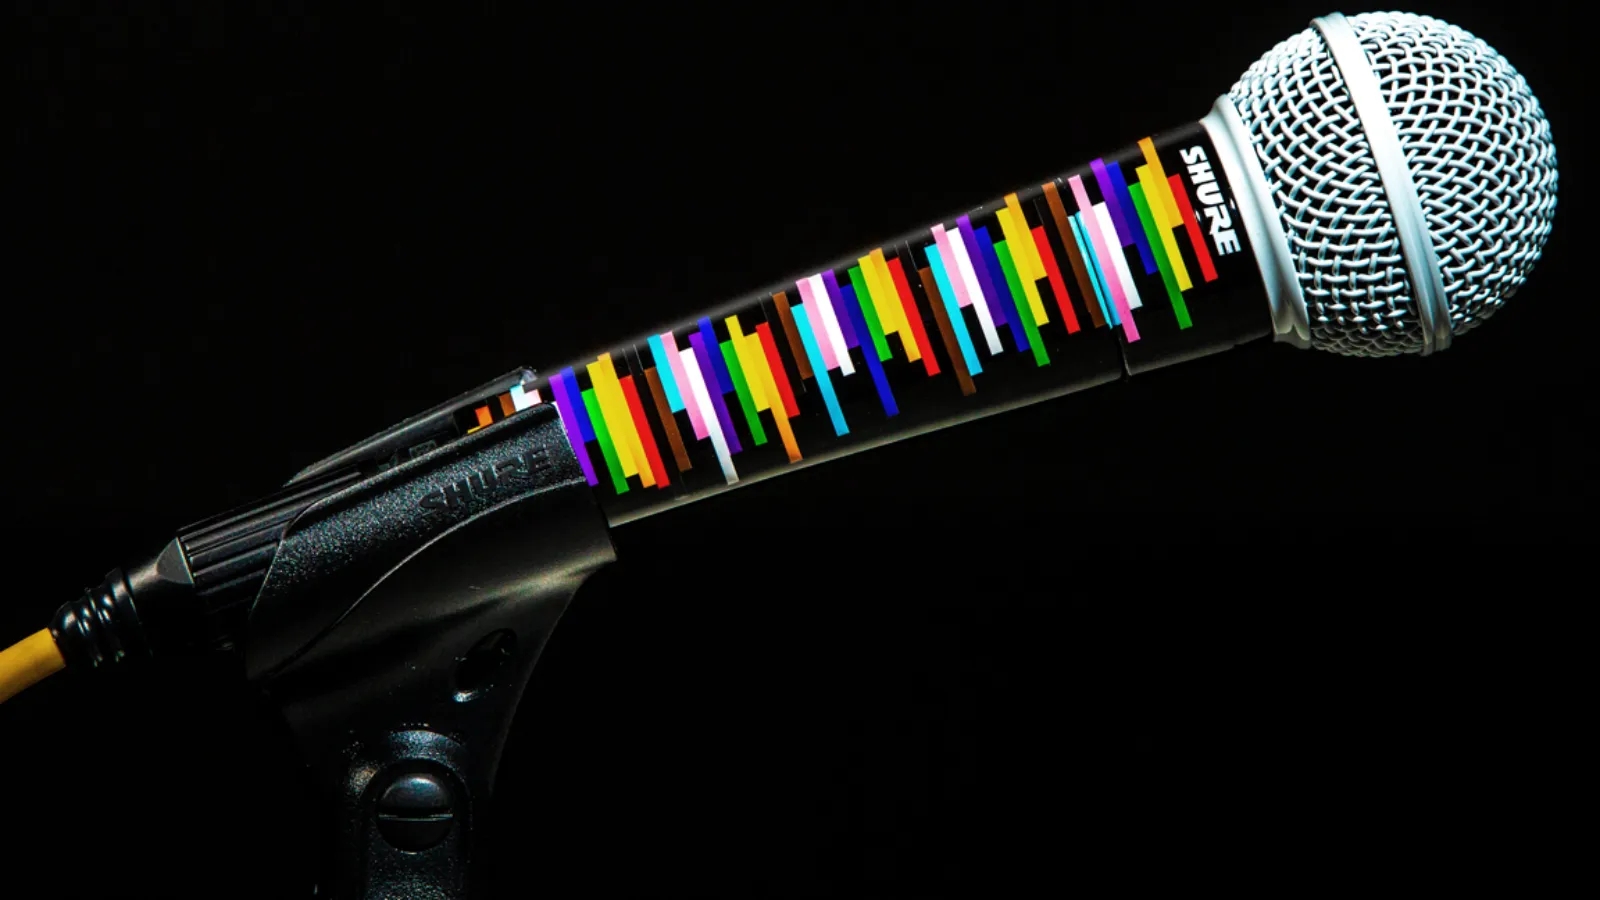 Shure is celebrating Pride Month with a limited-edition SM58 Pride microphone giveaway